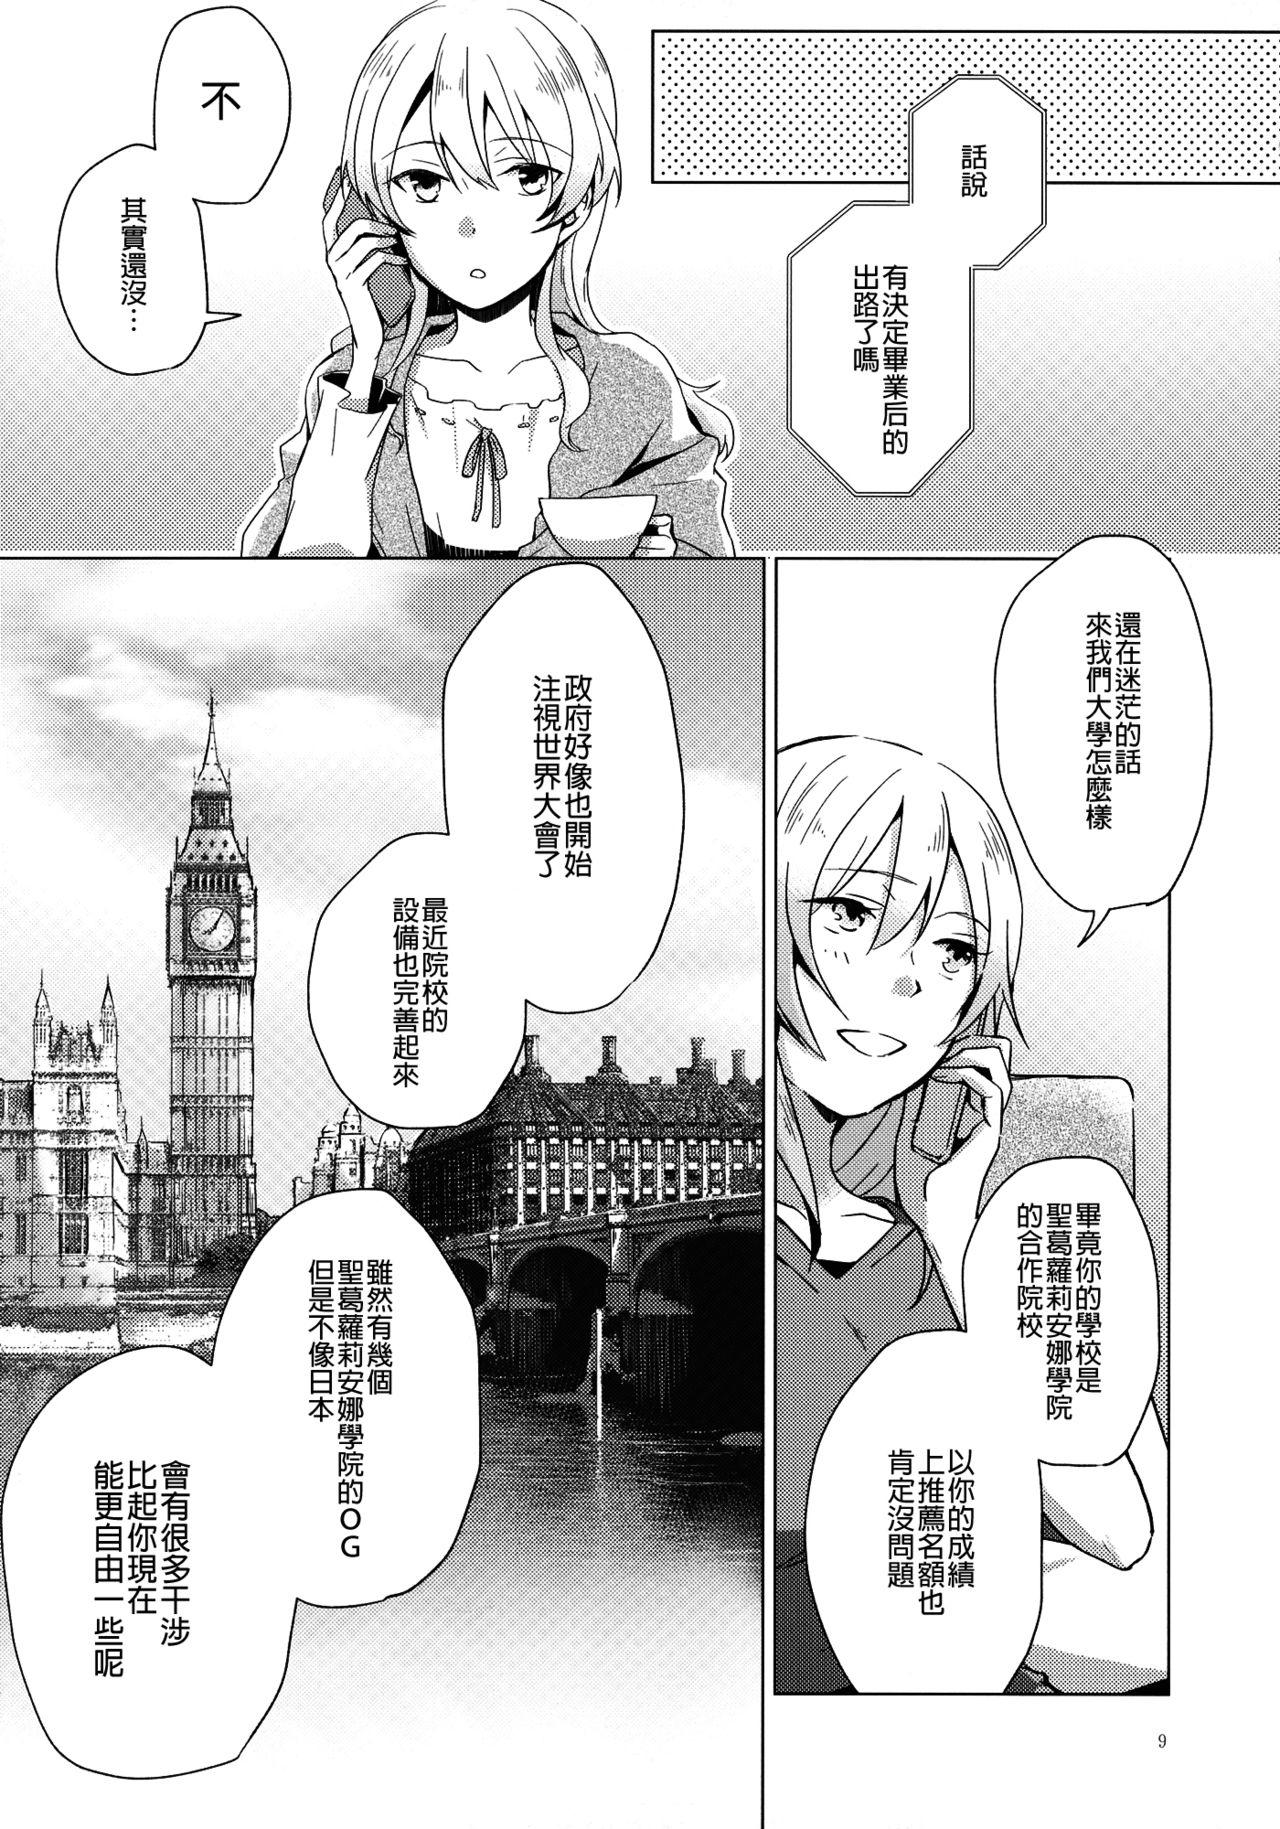 Chibola Over Time | 超時 - Girls und panzer Girl - Page 9